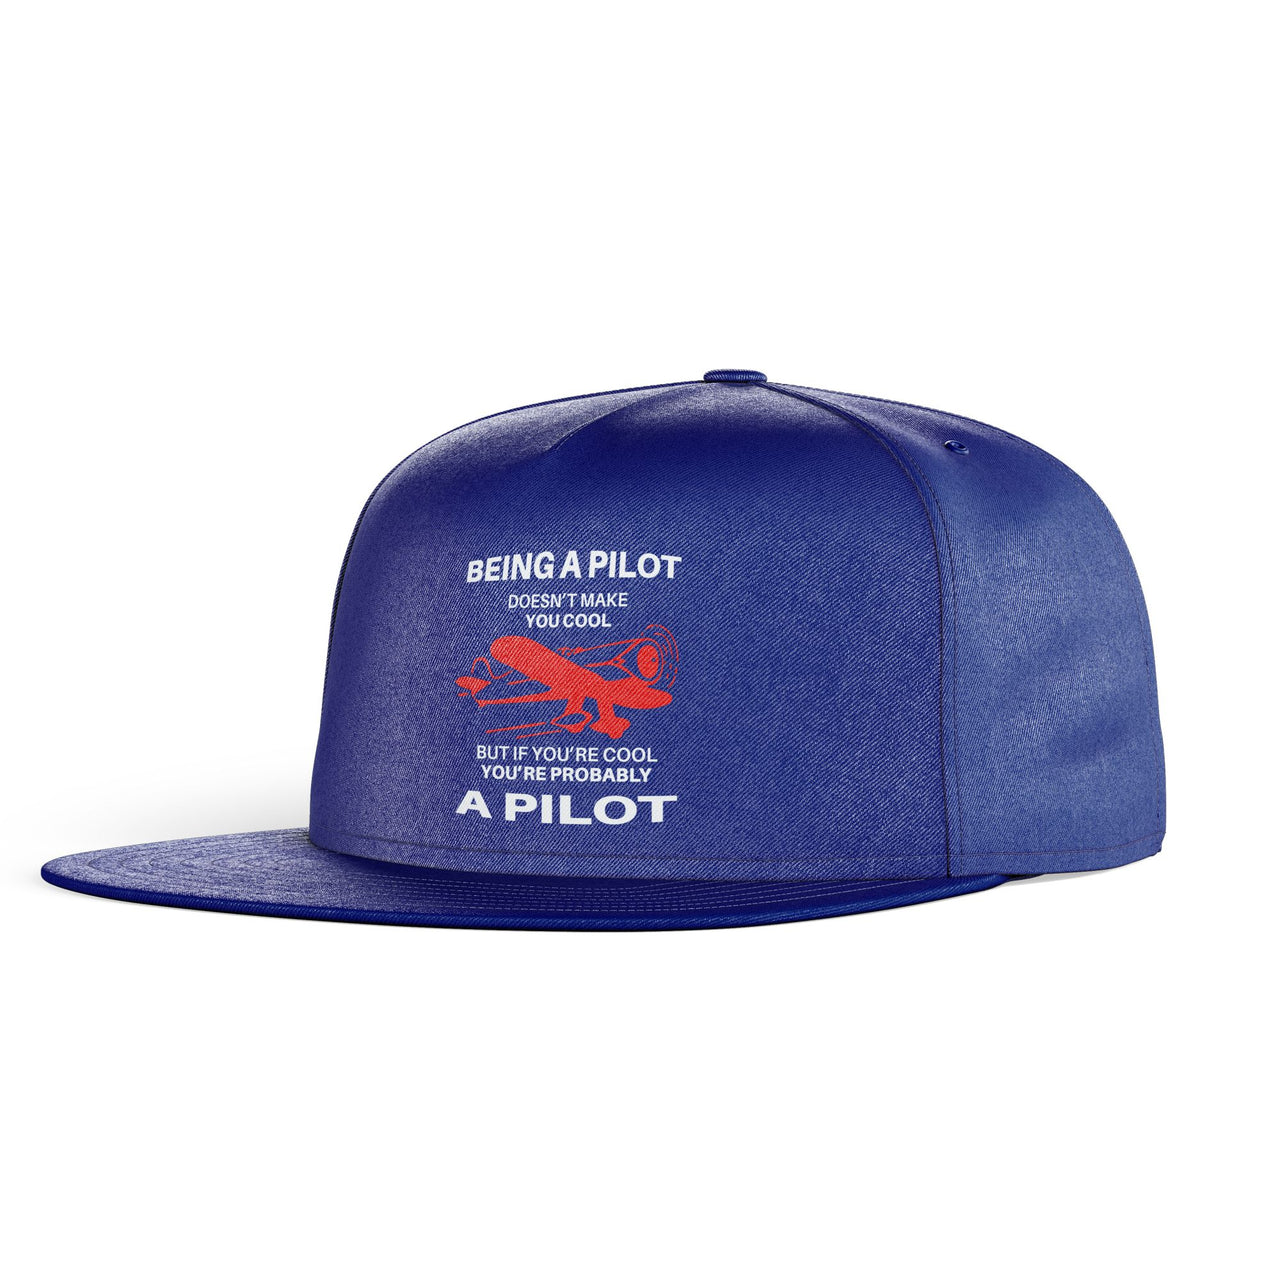 If You're Cool You're Probably a Pilot Designed Snapback Caps & Hats